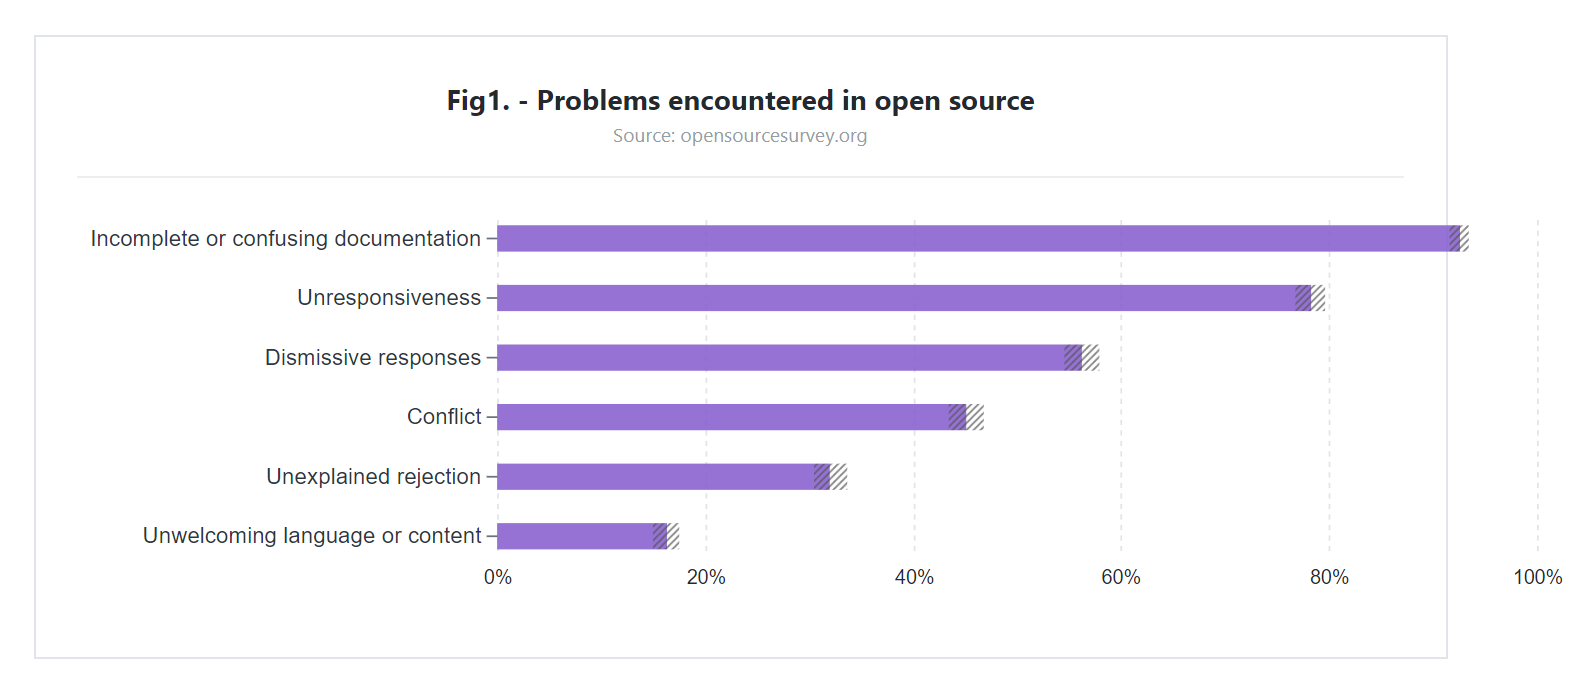 Problems of open source software users